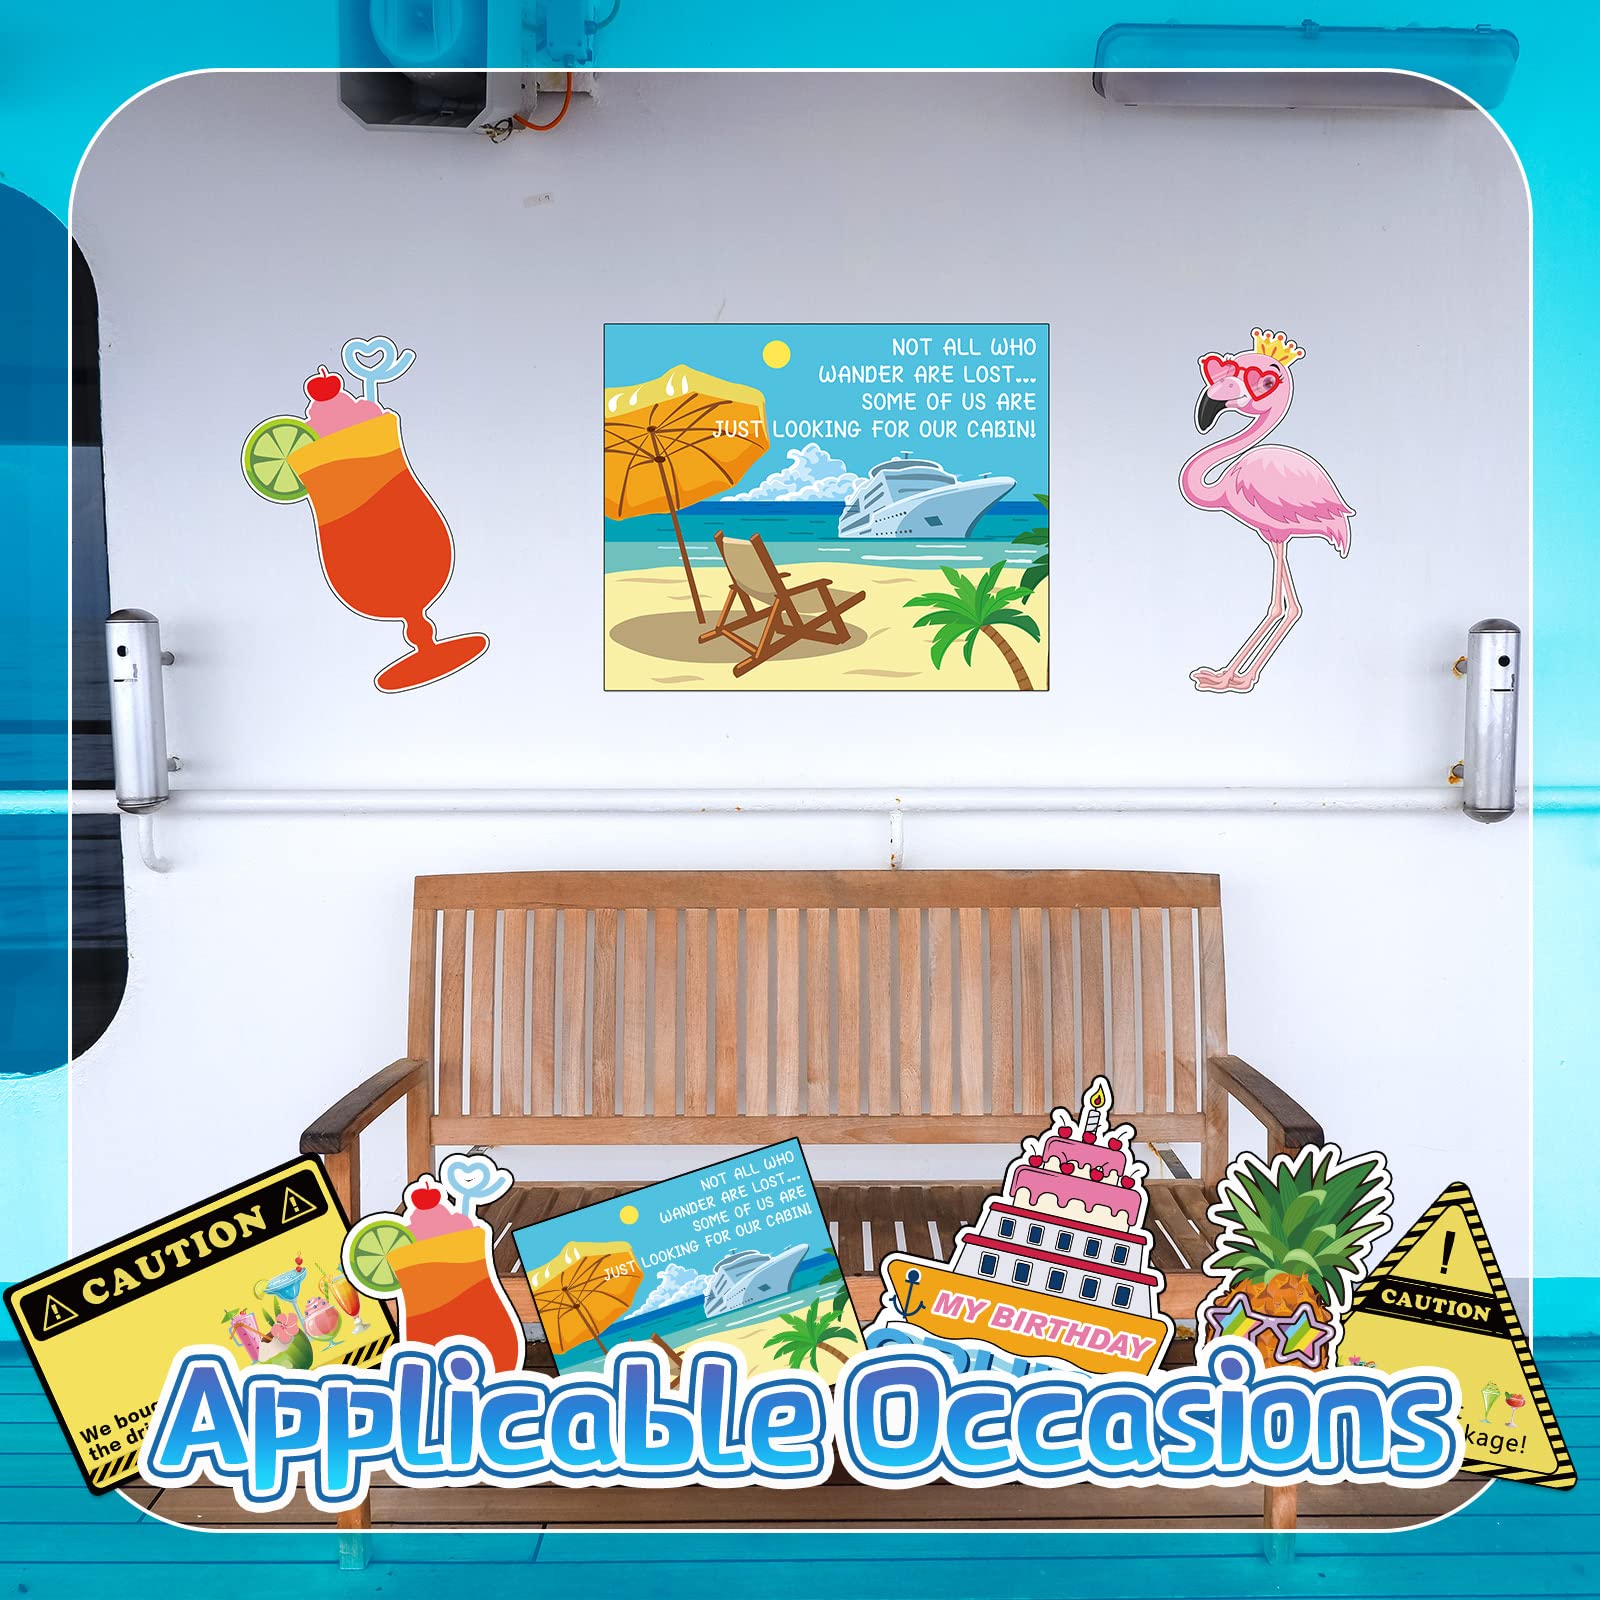 8 Pcs Cruise Door Decorations Birthday Cruise Door Magnets Sign and 3 Paint Pens Caution Fruit Porthole Funny Magnetic Cabin Cruise Door Stickers for Carnival Cruise Cabin Stateroom Fridge Door